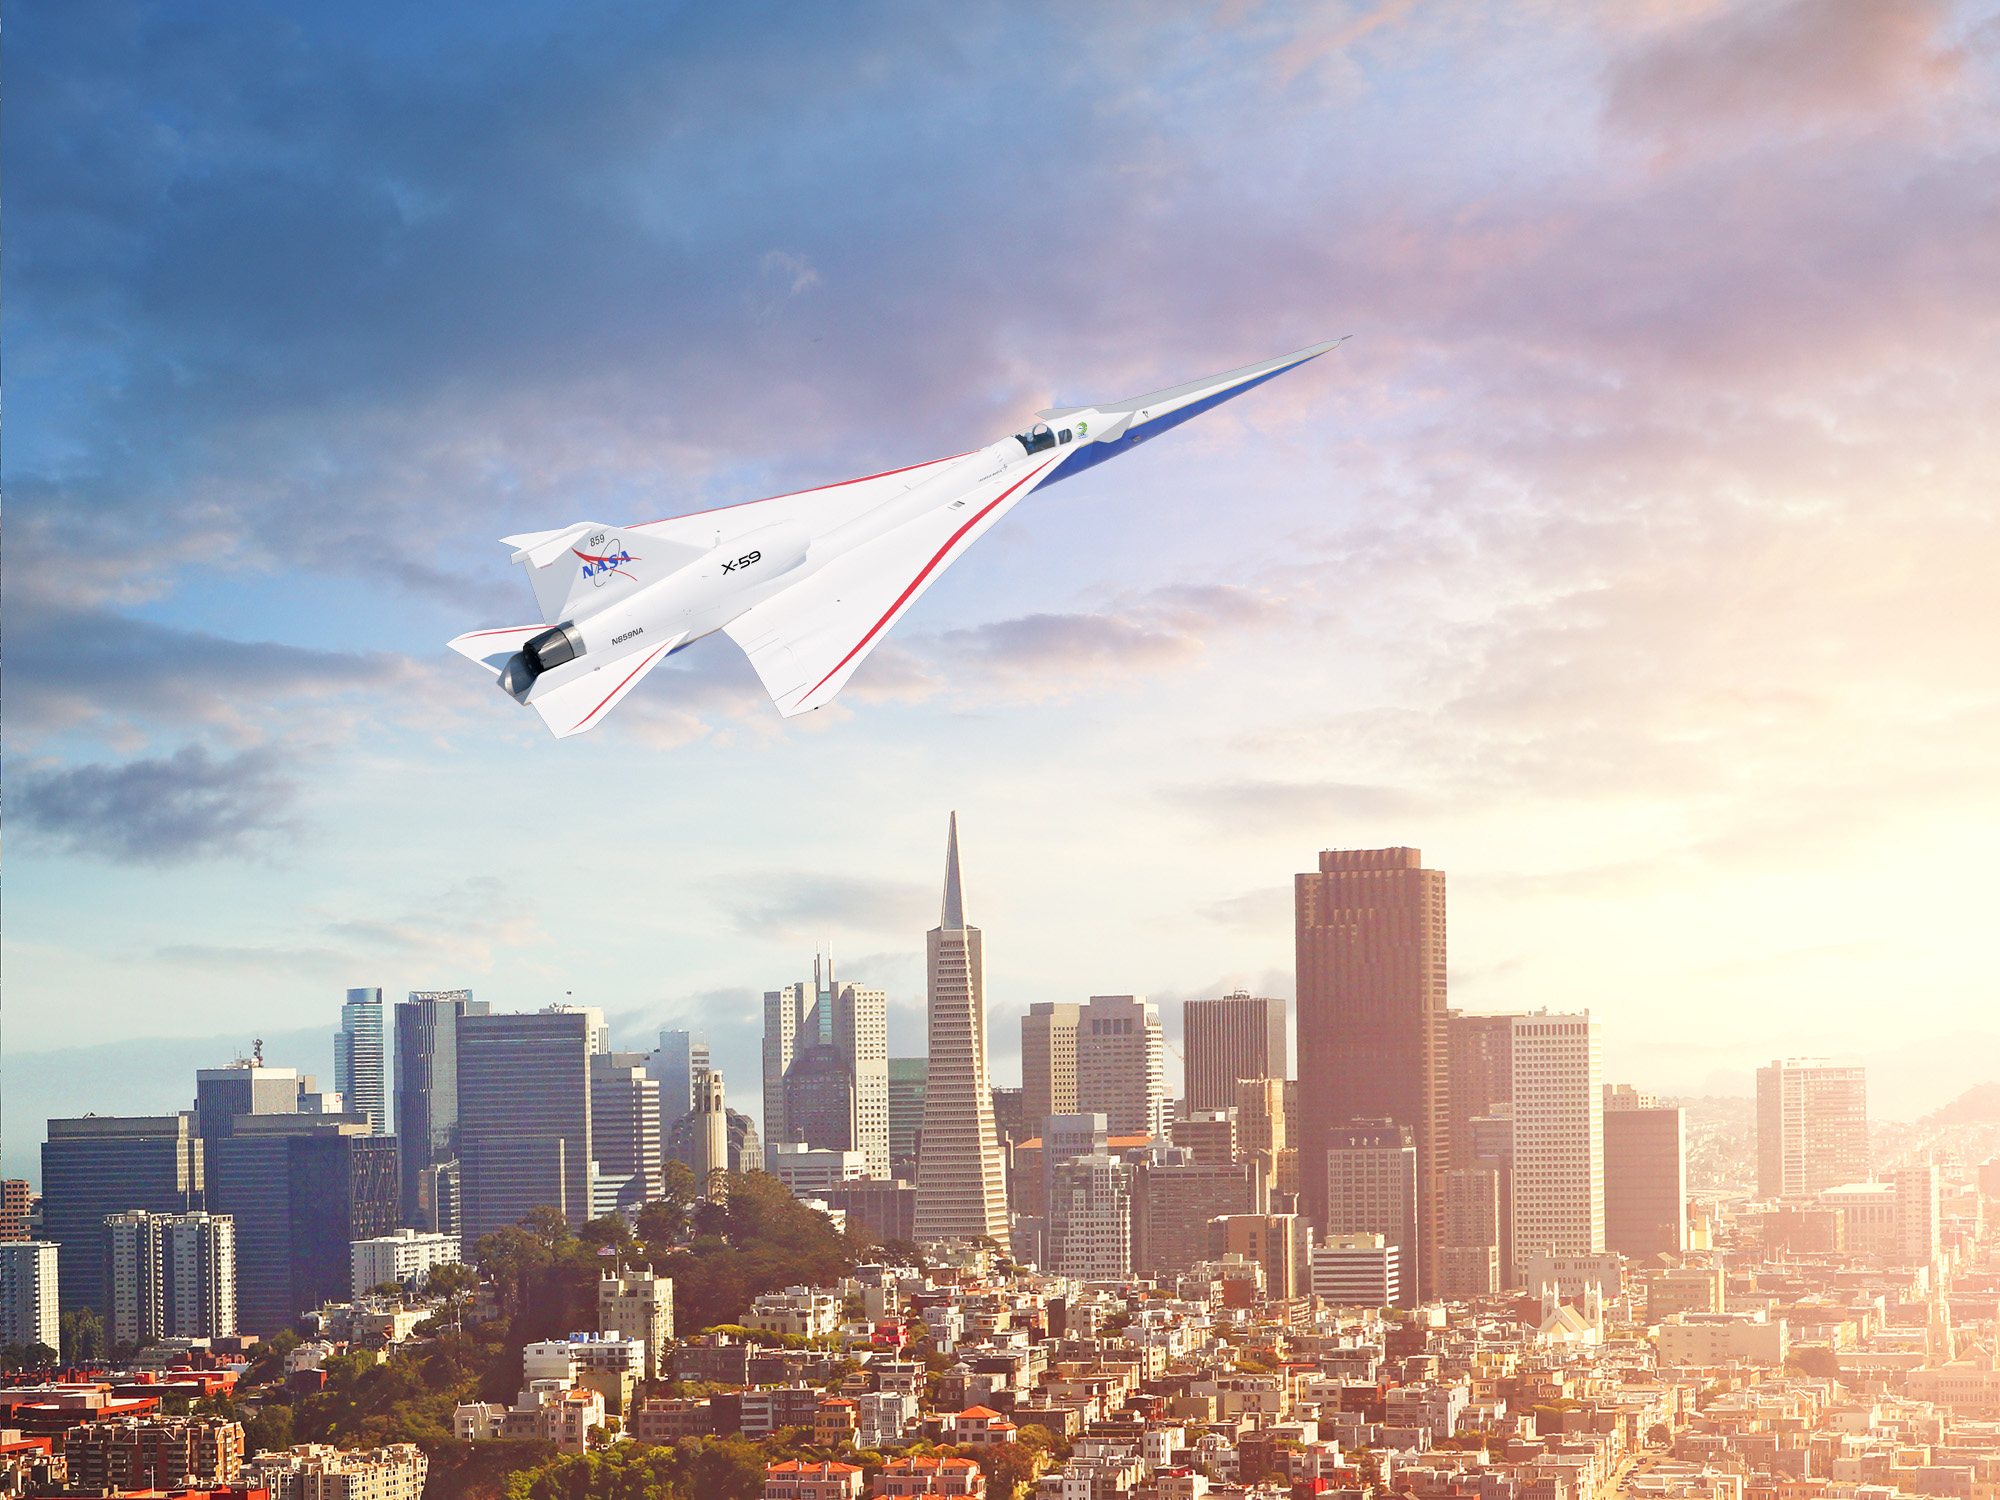 Artist concept of a Low-Boom aircraft in flight over San Francisco, CA.